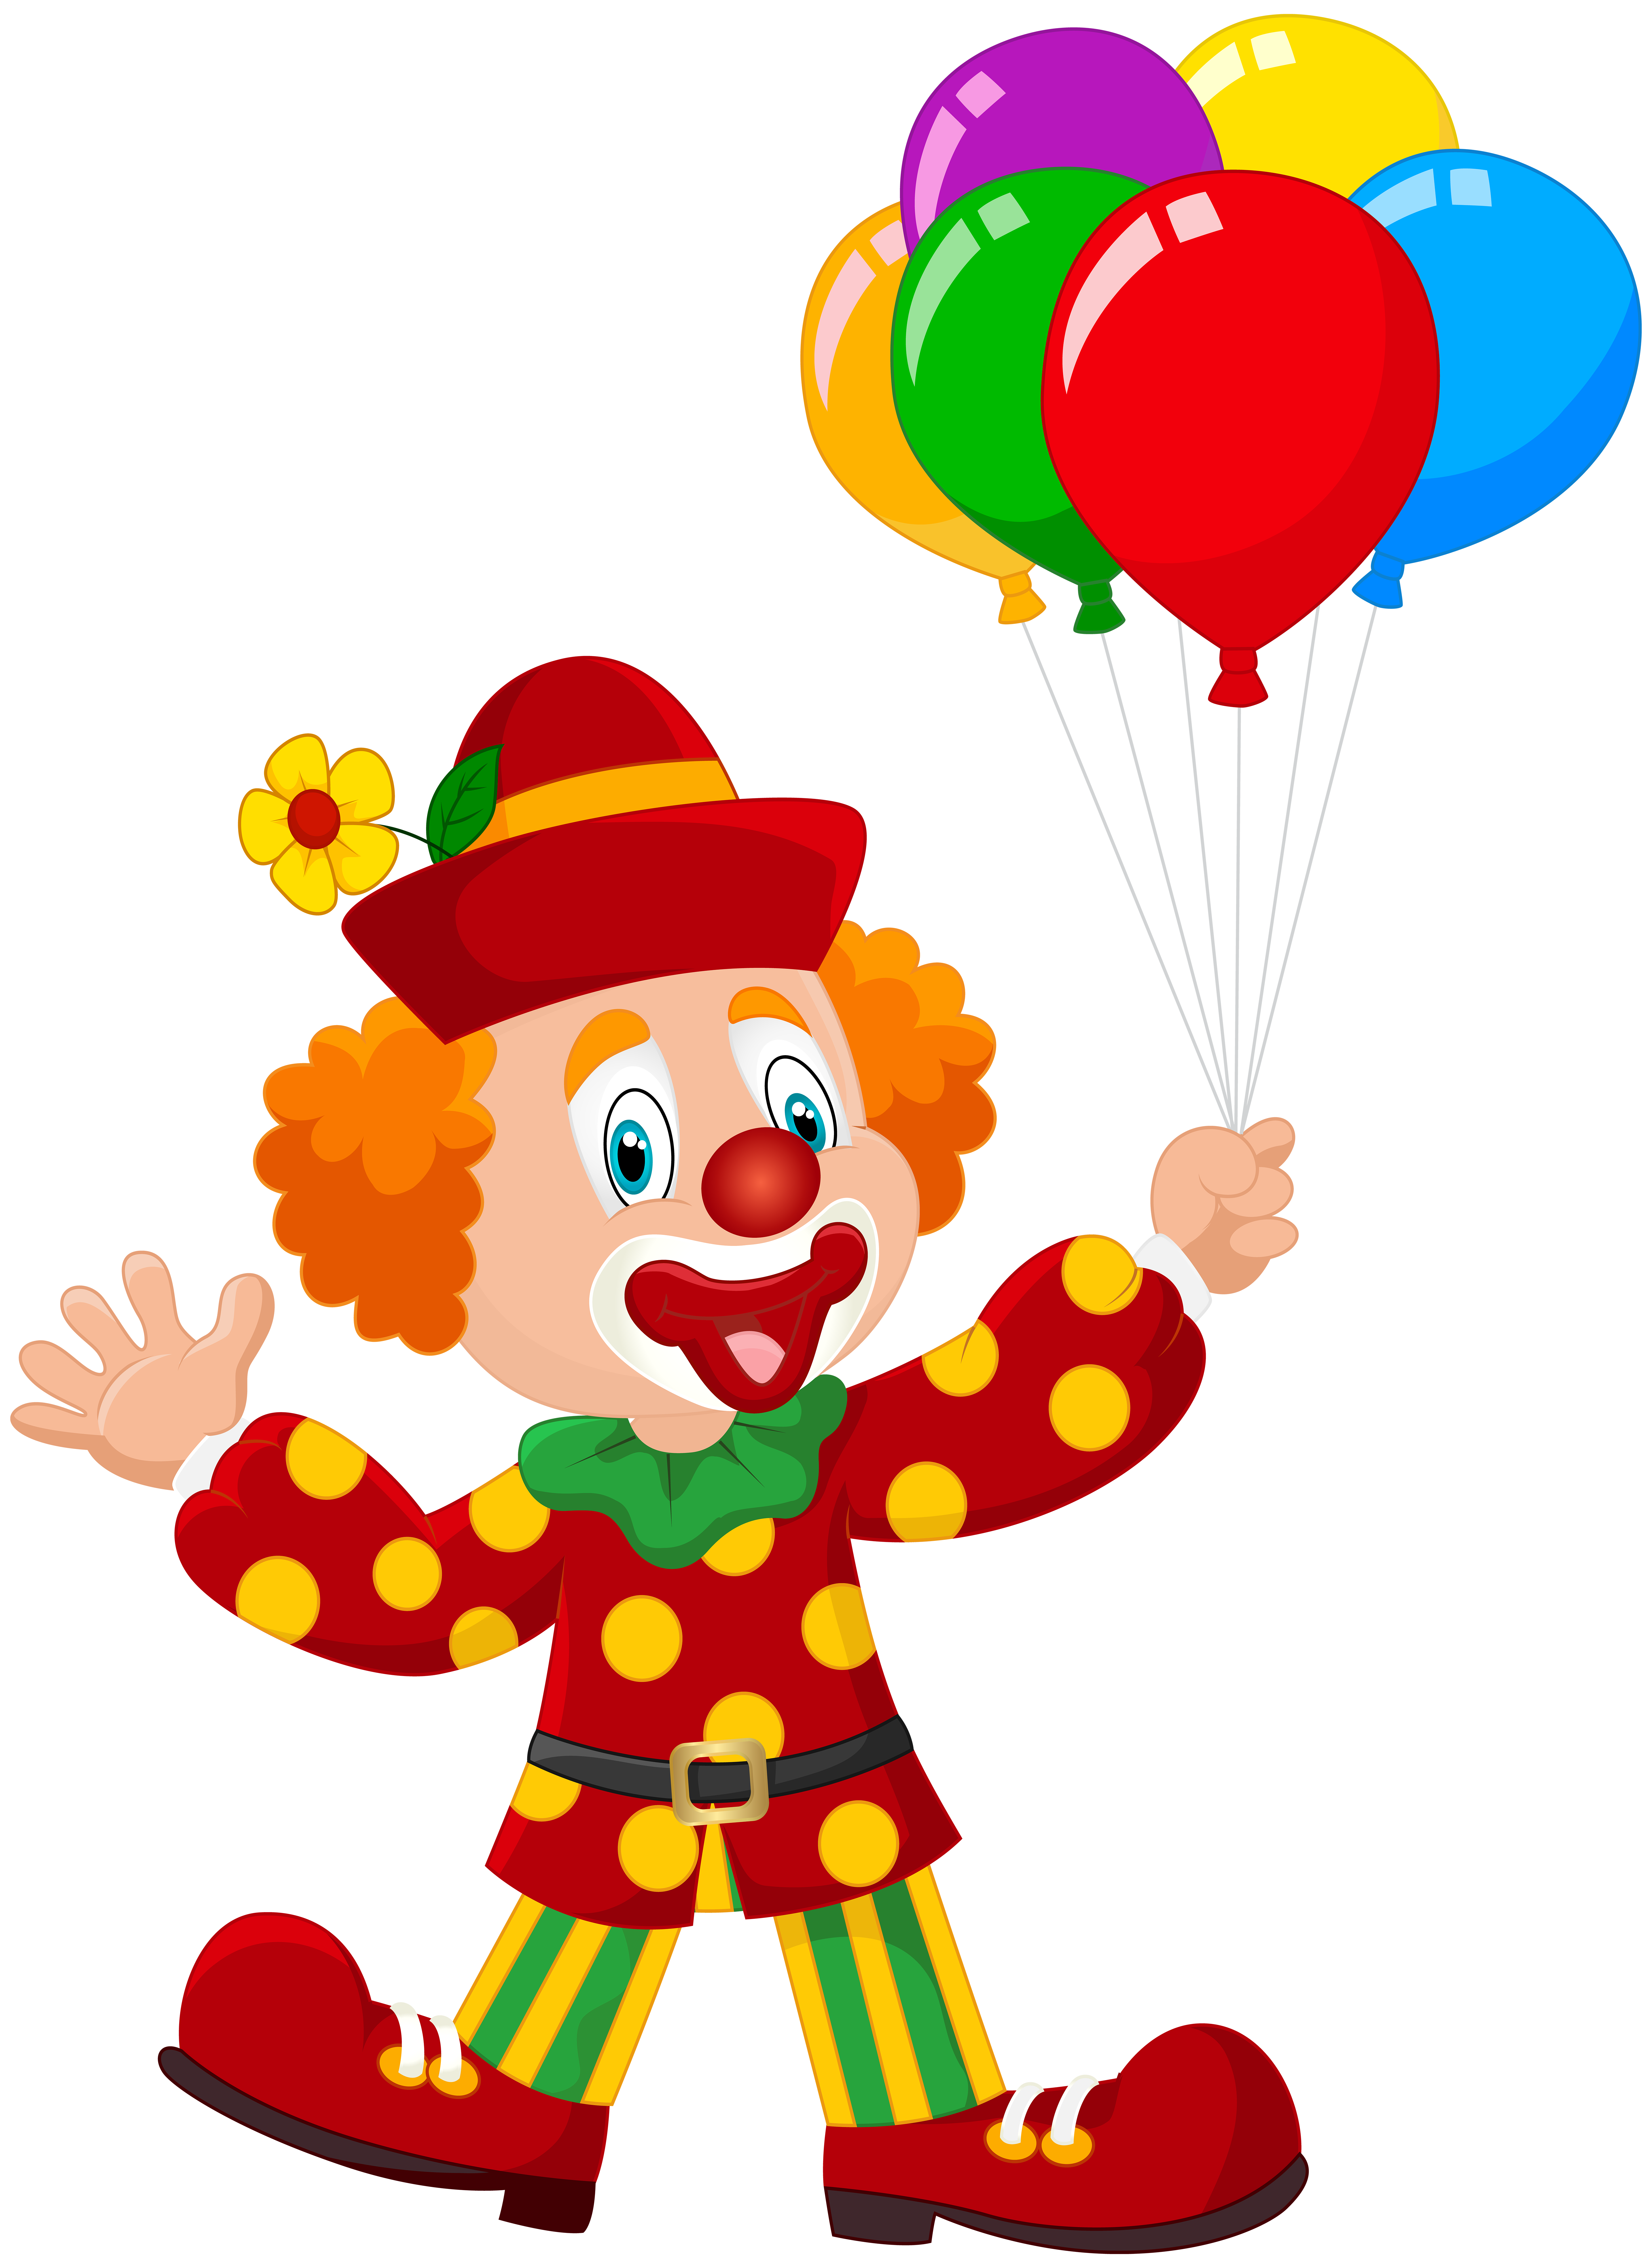 Clown with balloons.